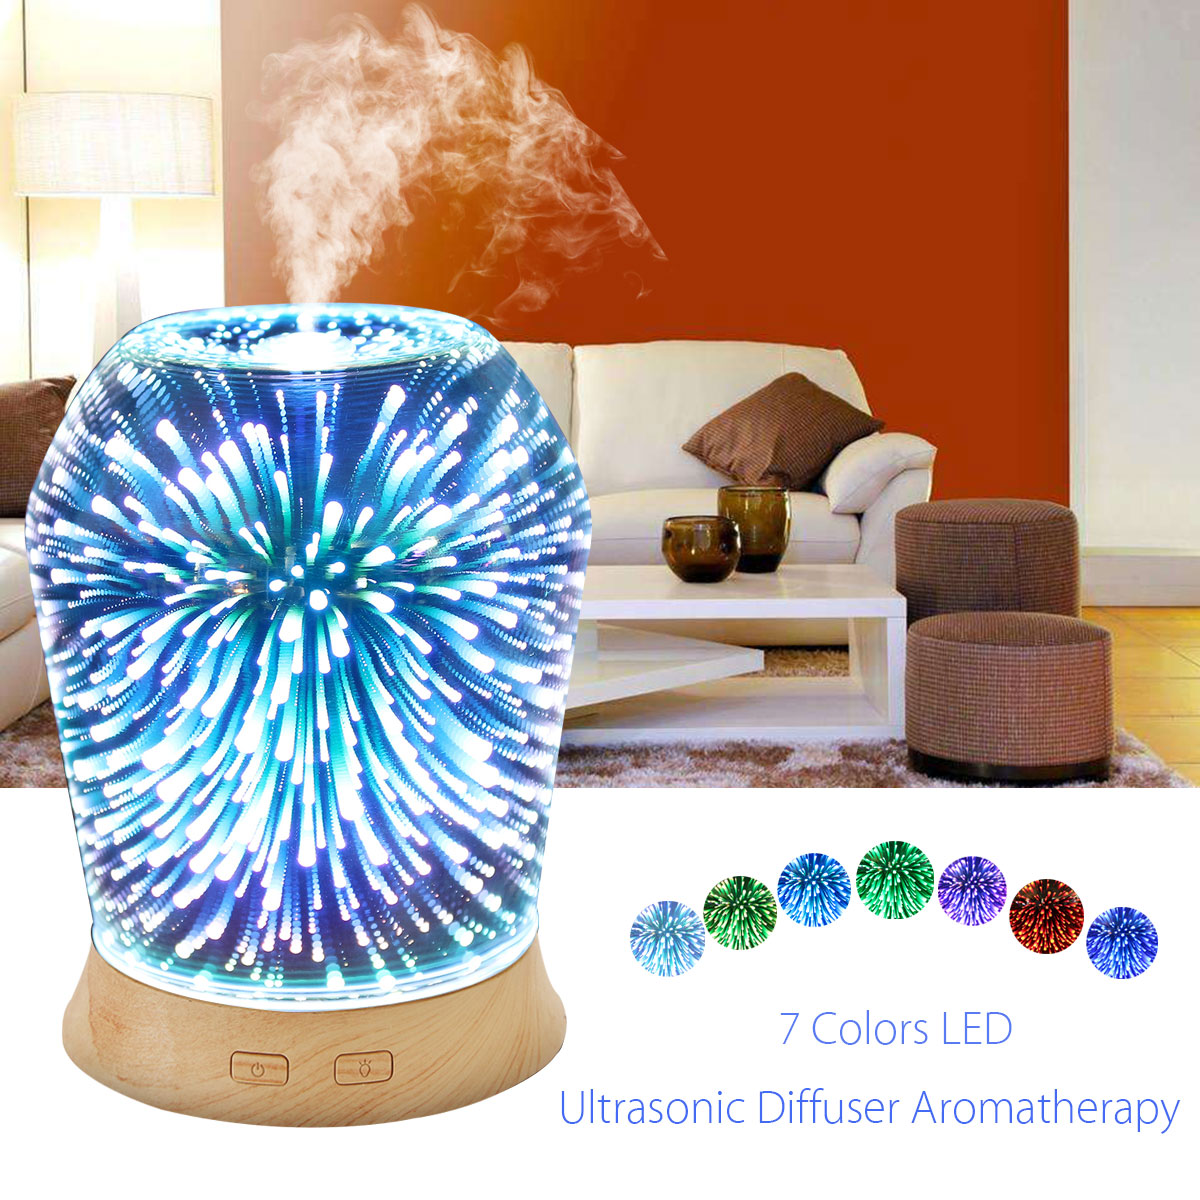 3D-LED-Ultrasonic-Diffuser-Humidifier-Aromatherapy-Essential-Oil-Diffuser-Mist-Humidifier-1421490-3